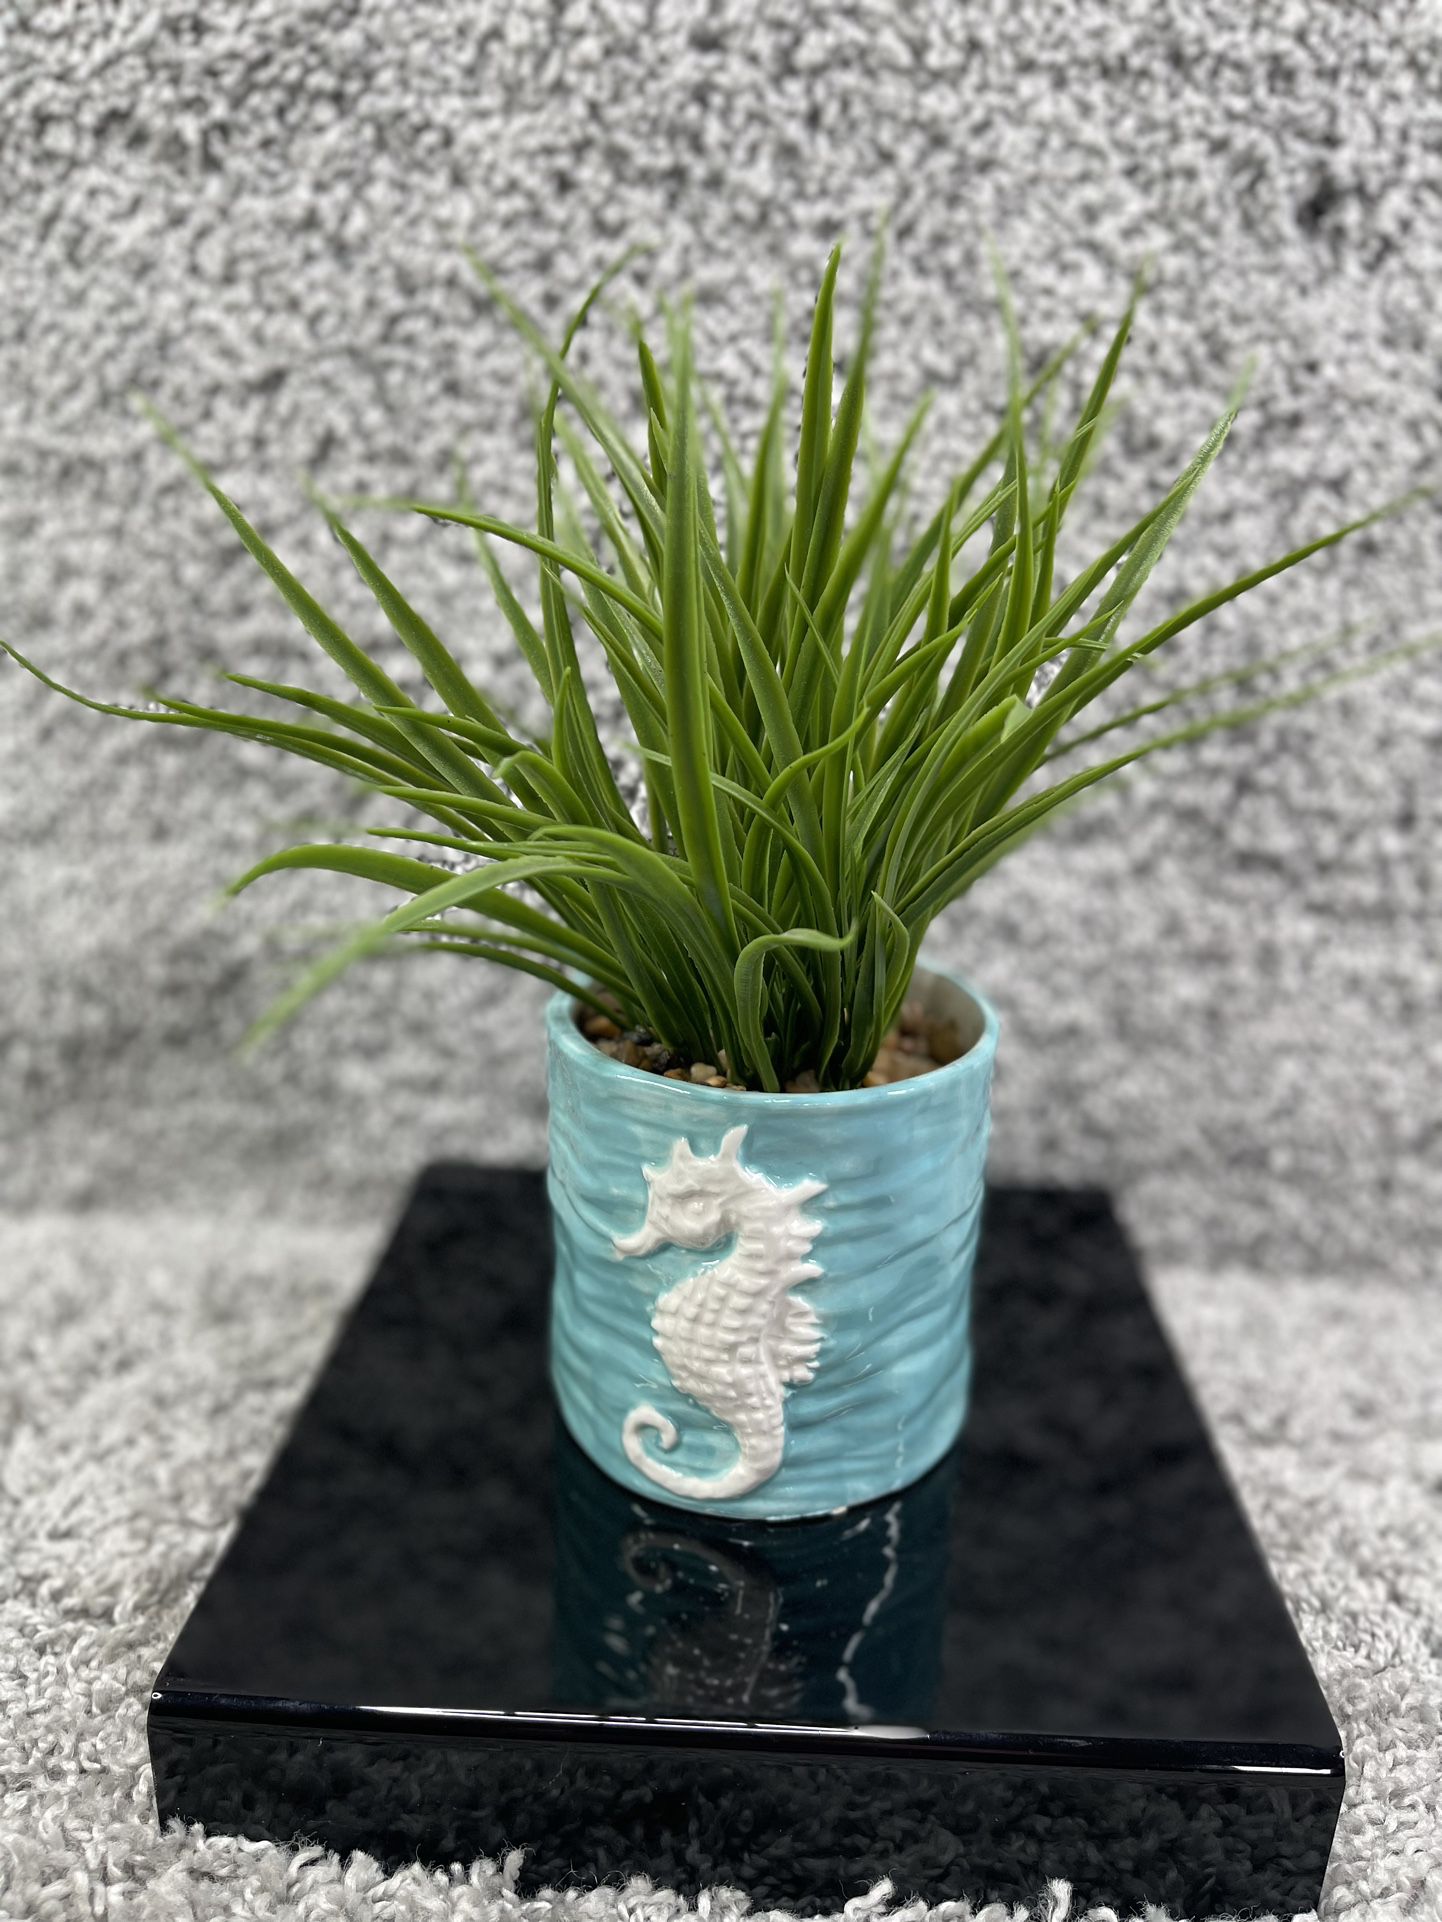 Green Artificial Grass Plant With Carved Sea Horse In Pot